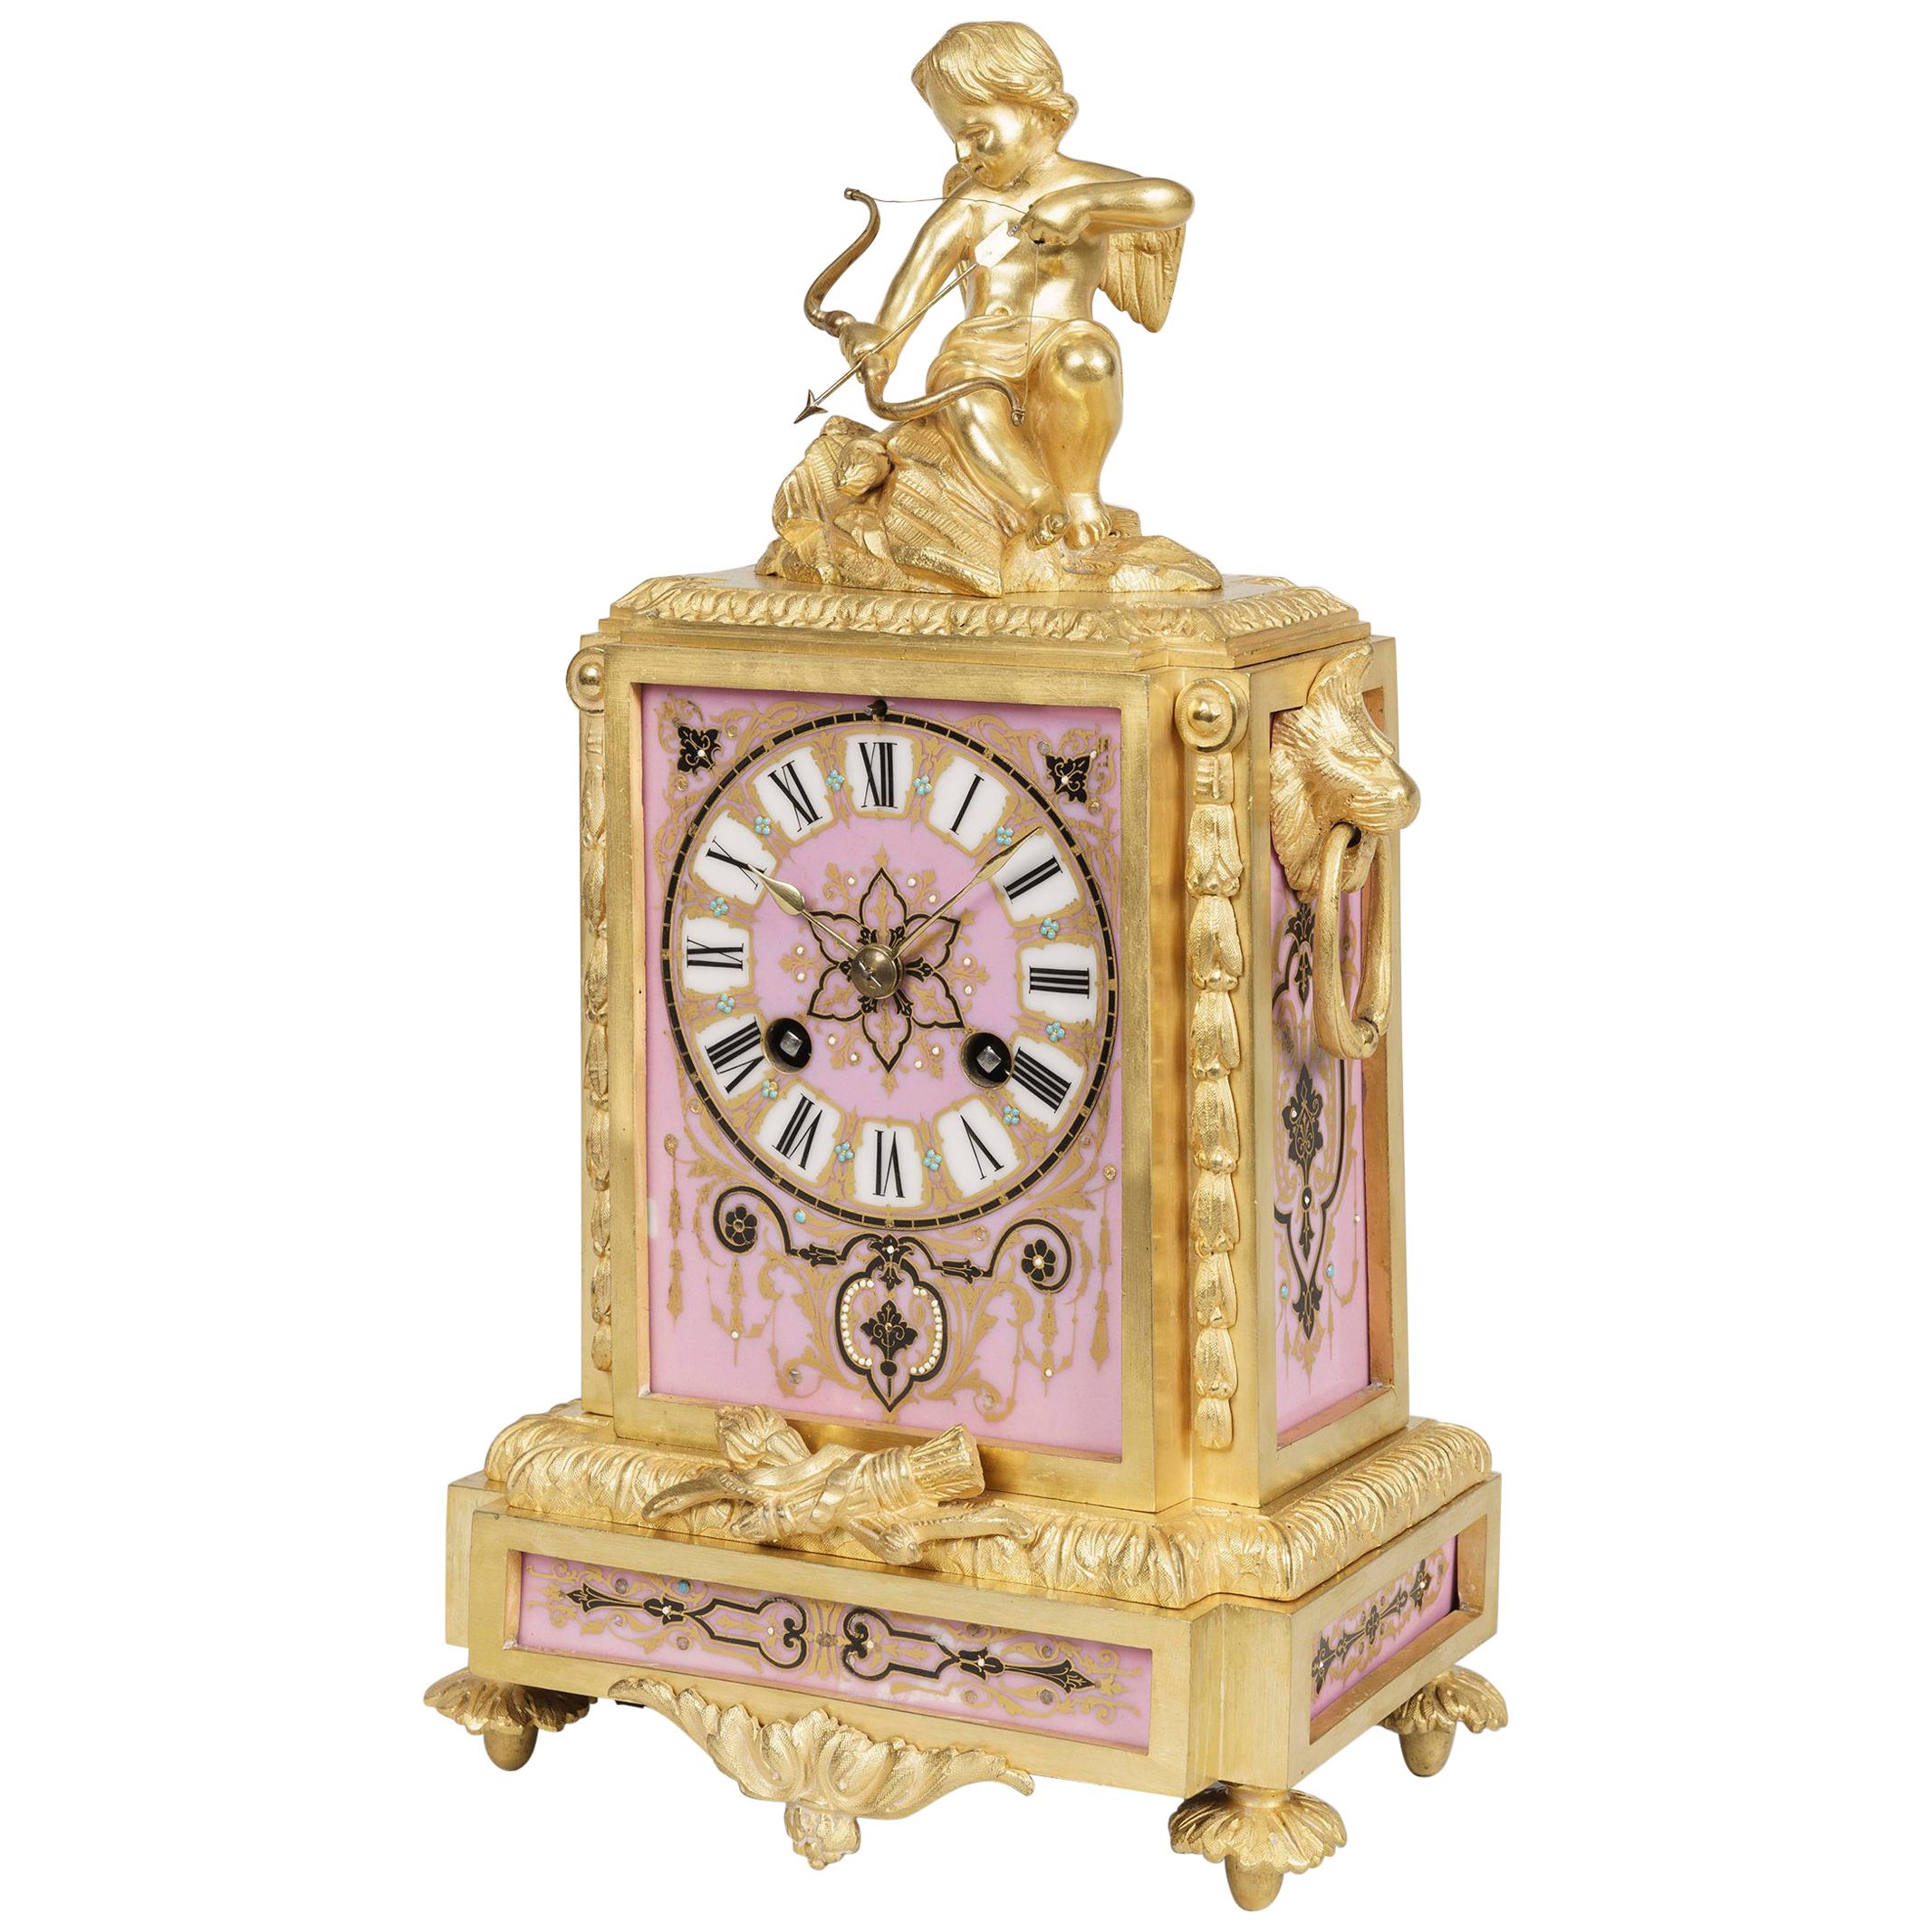 19th Century French Pink Porcelain Clock with Romantic Emblems